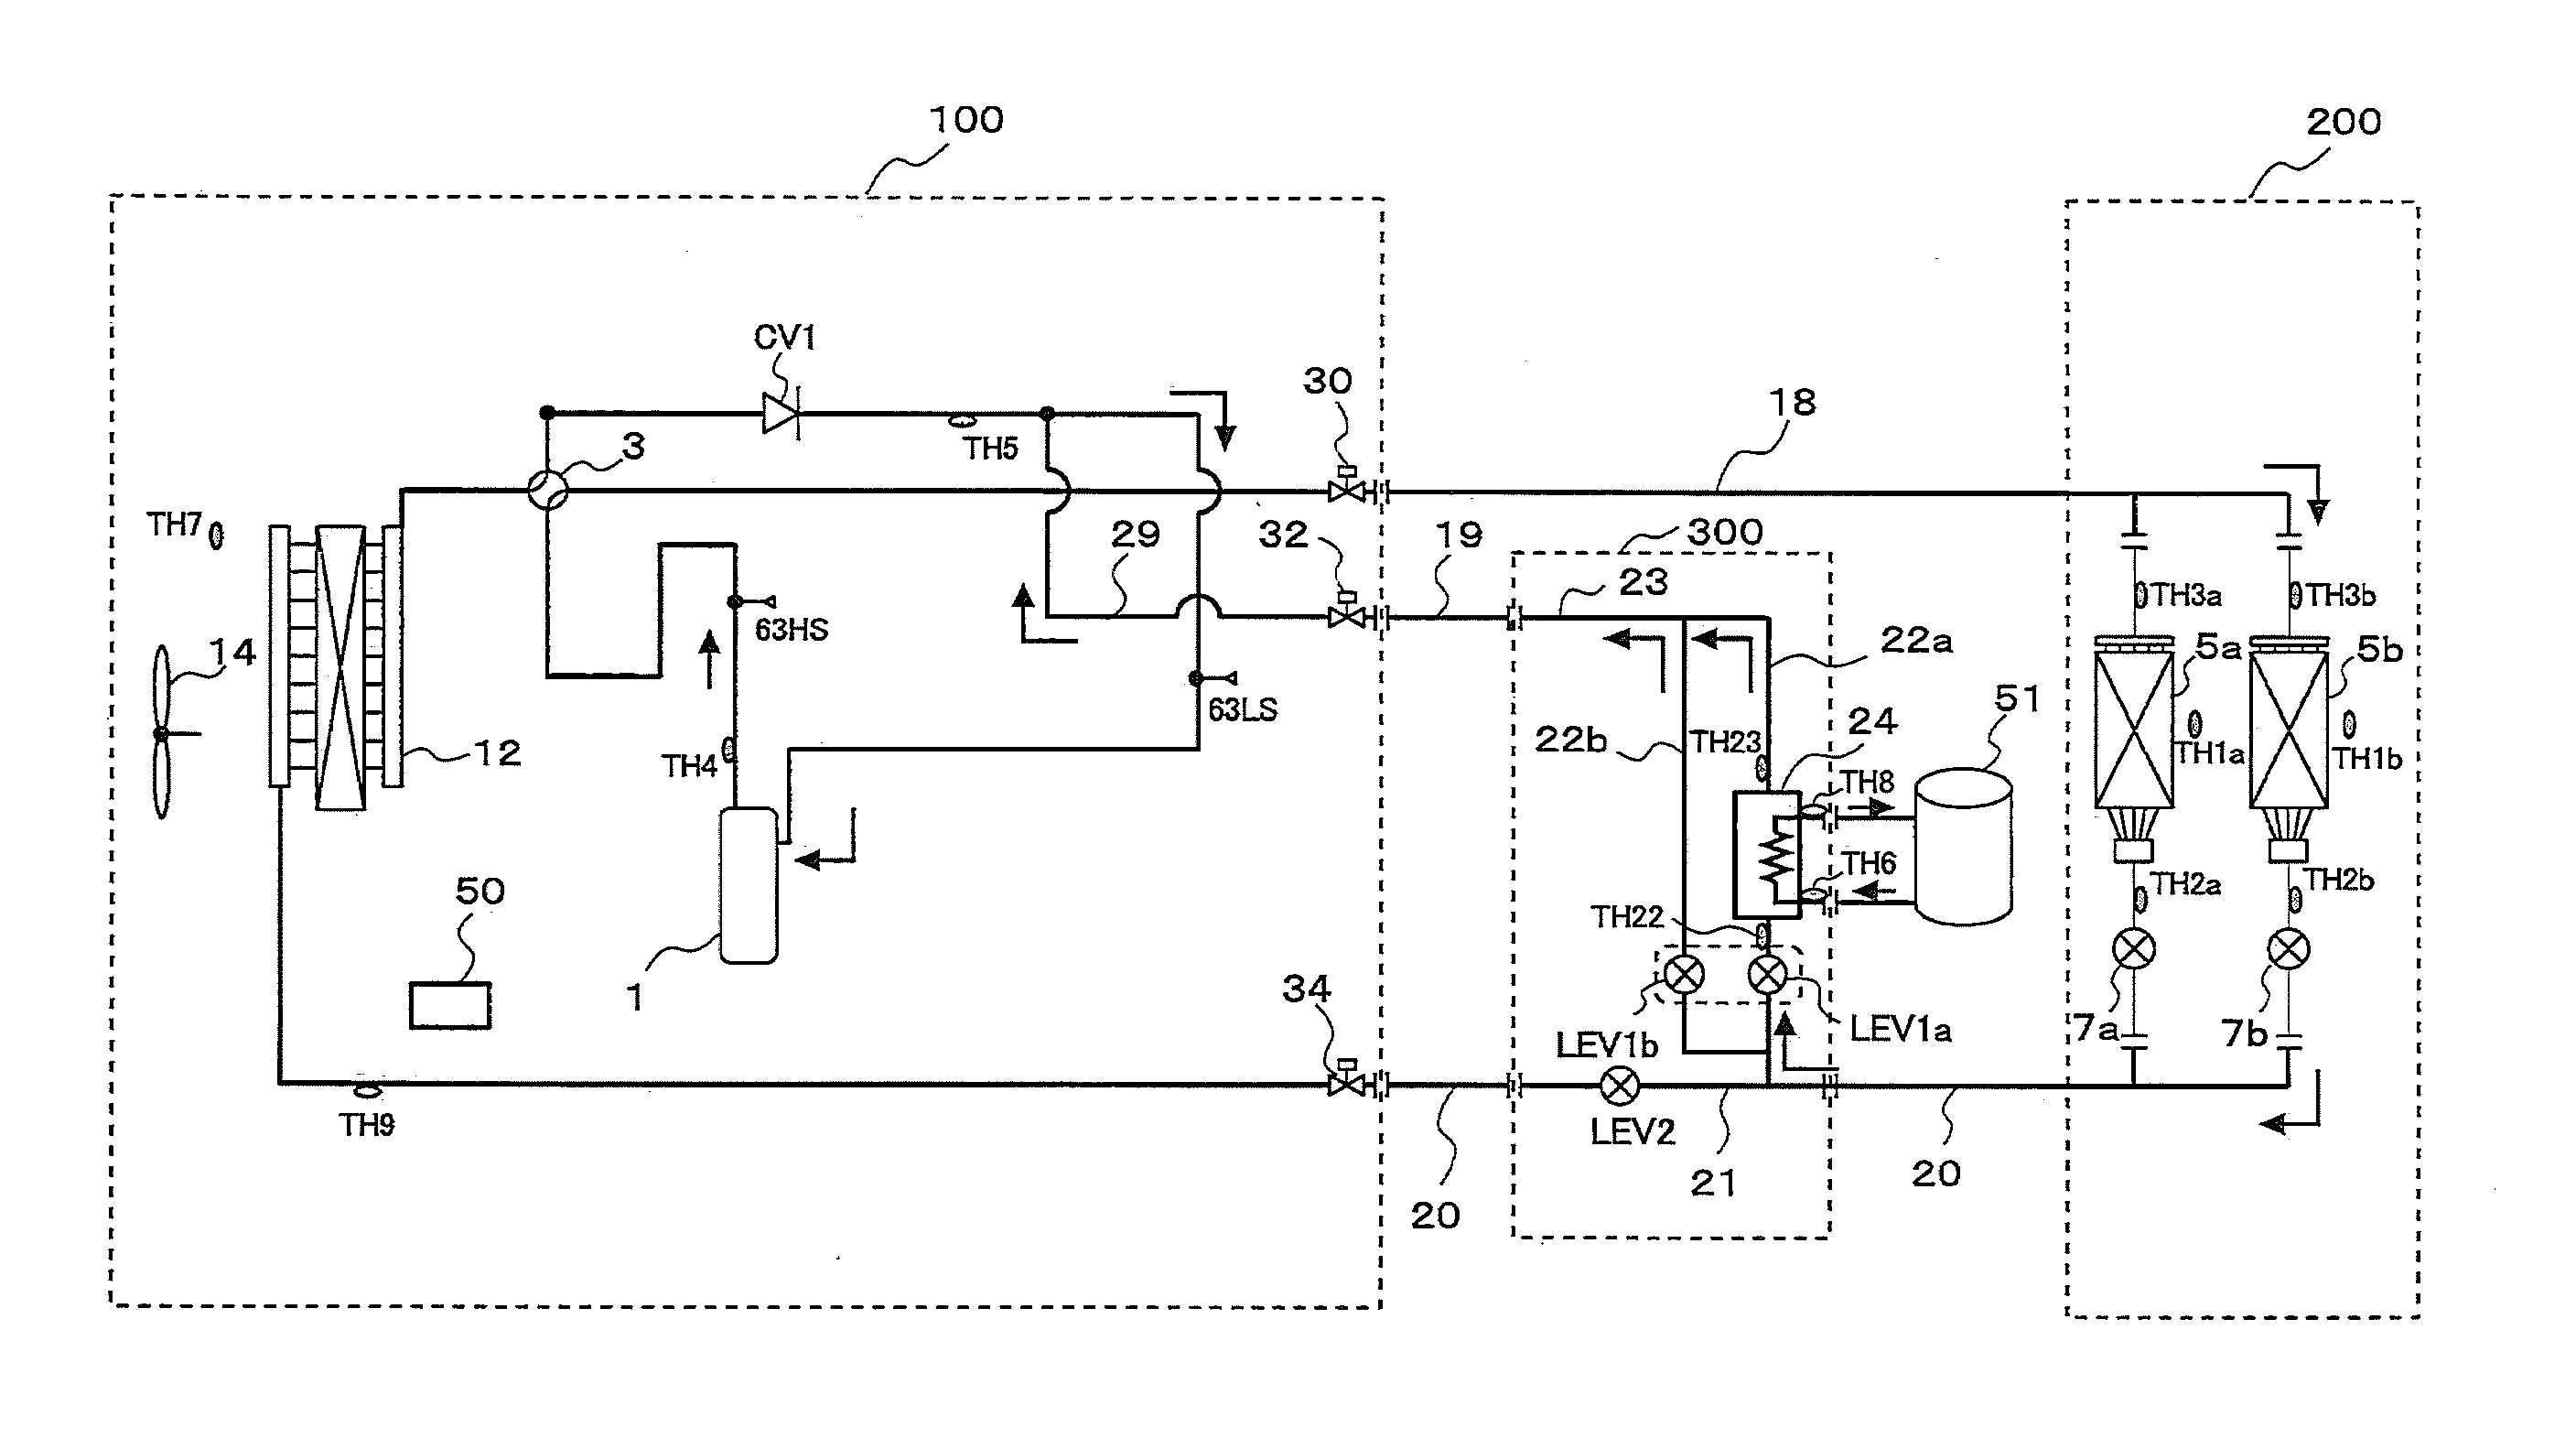 Air-conditioning apparatus including unit for increasing heating capacity